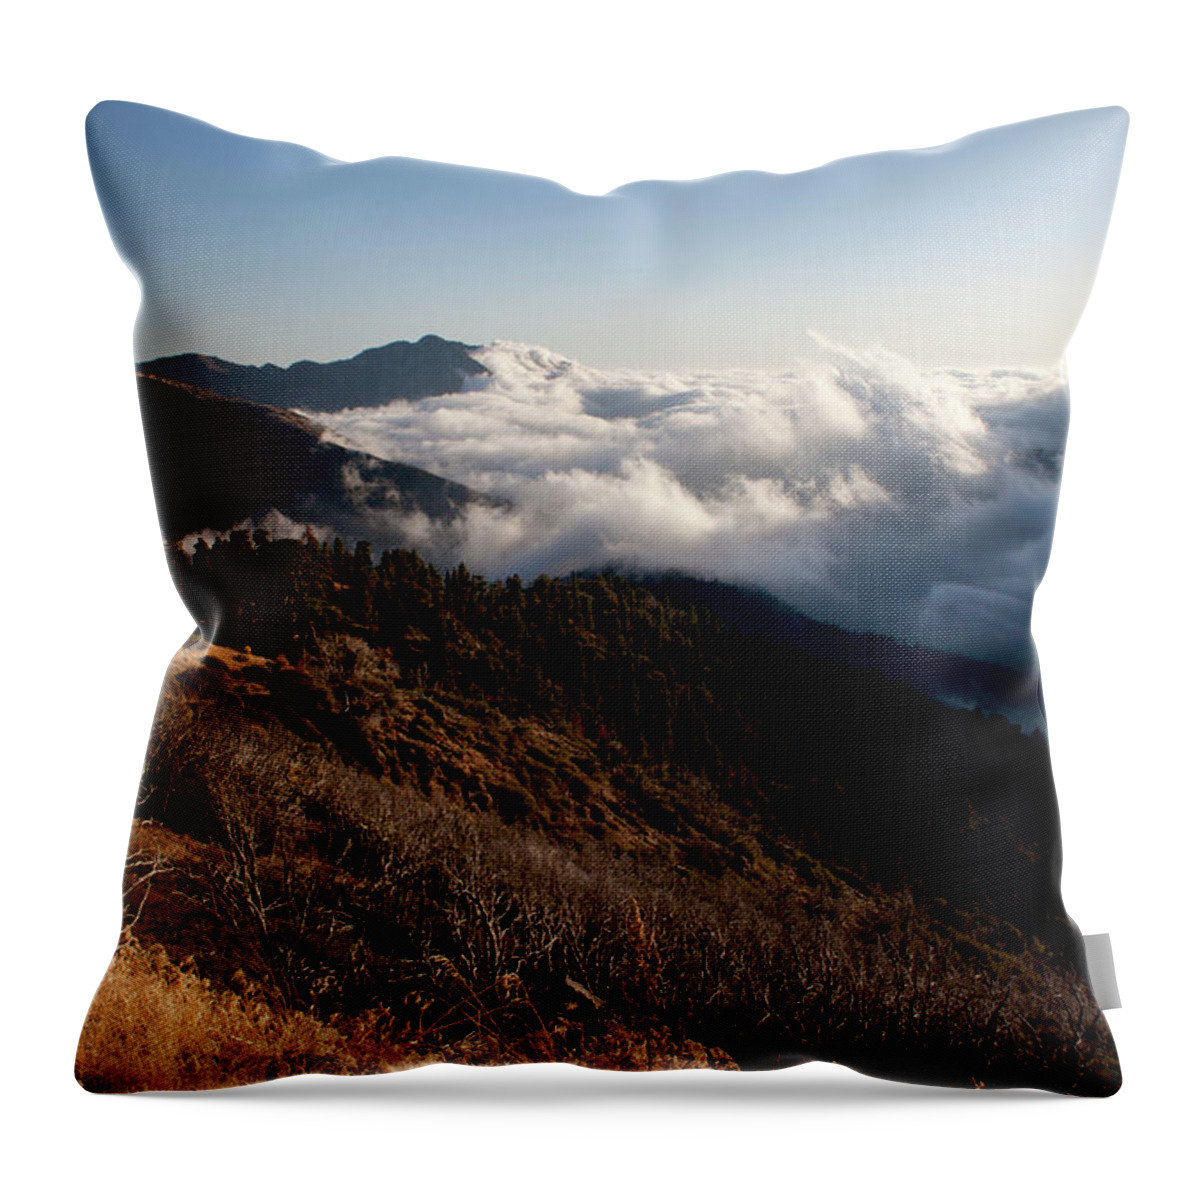 Inspiration Point Throw Pillow featuring the photograph Inspiration Point View by Ivete Basso Photography